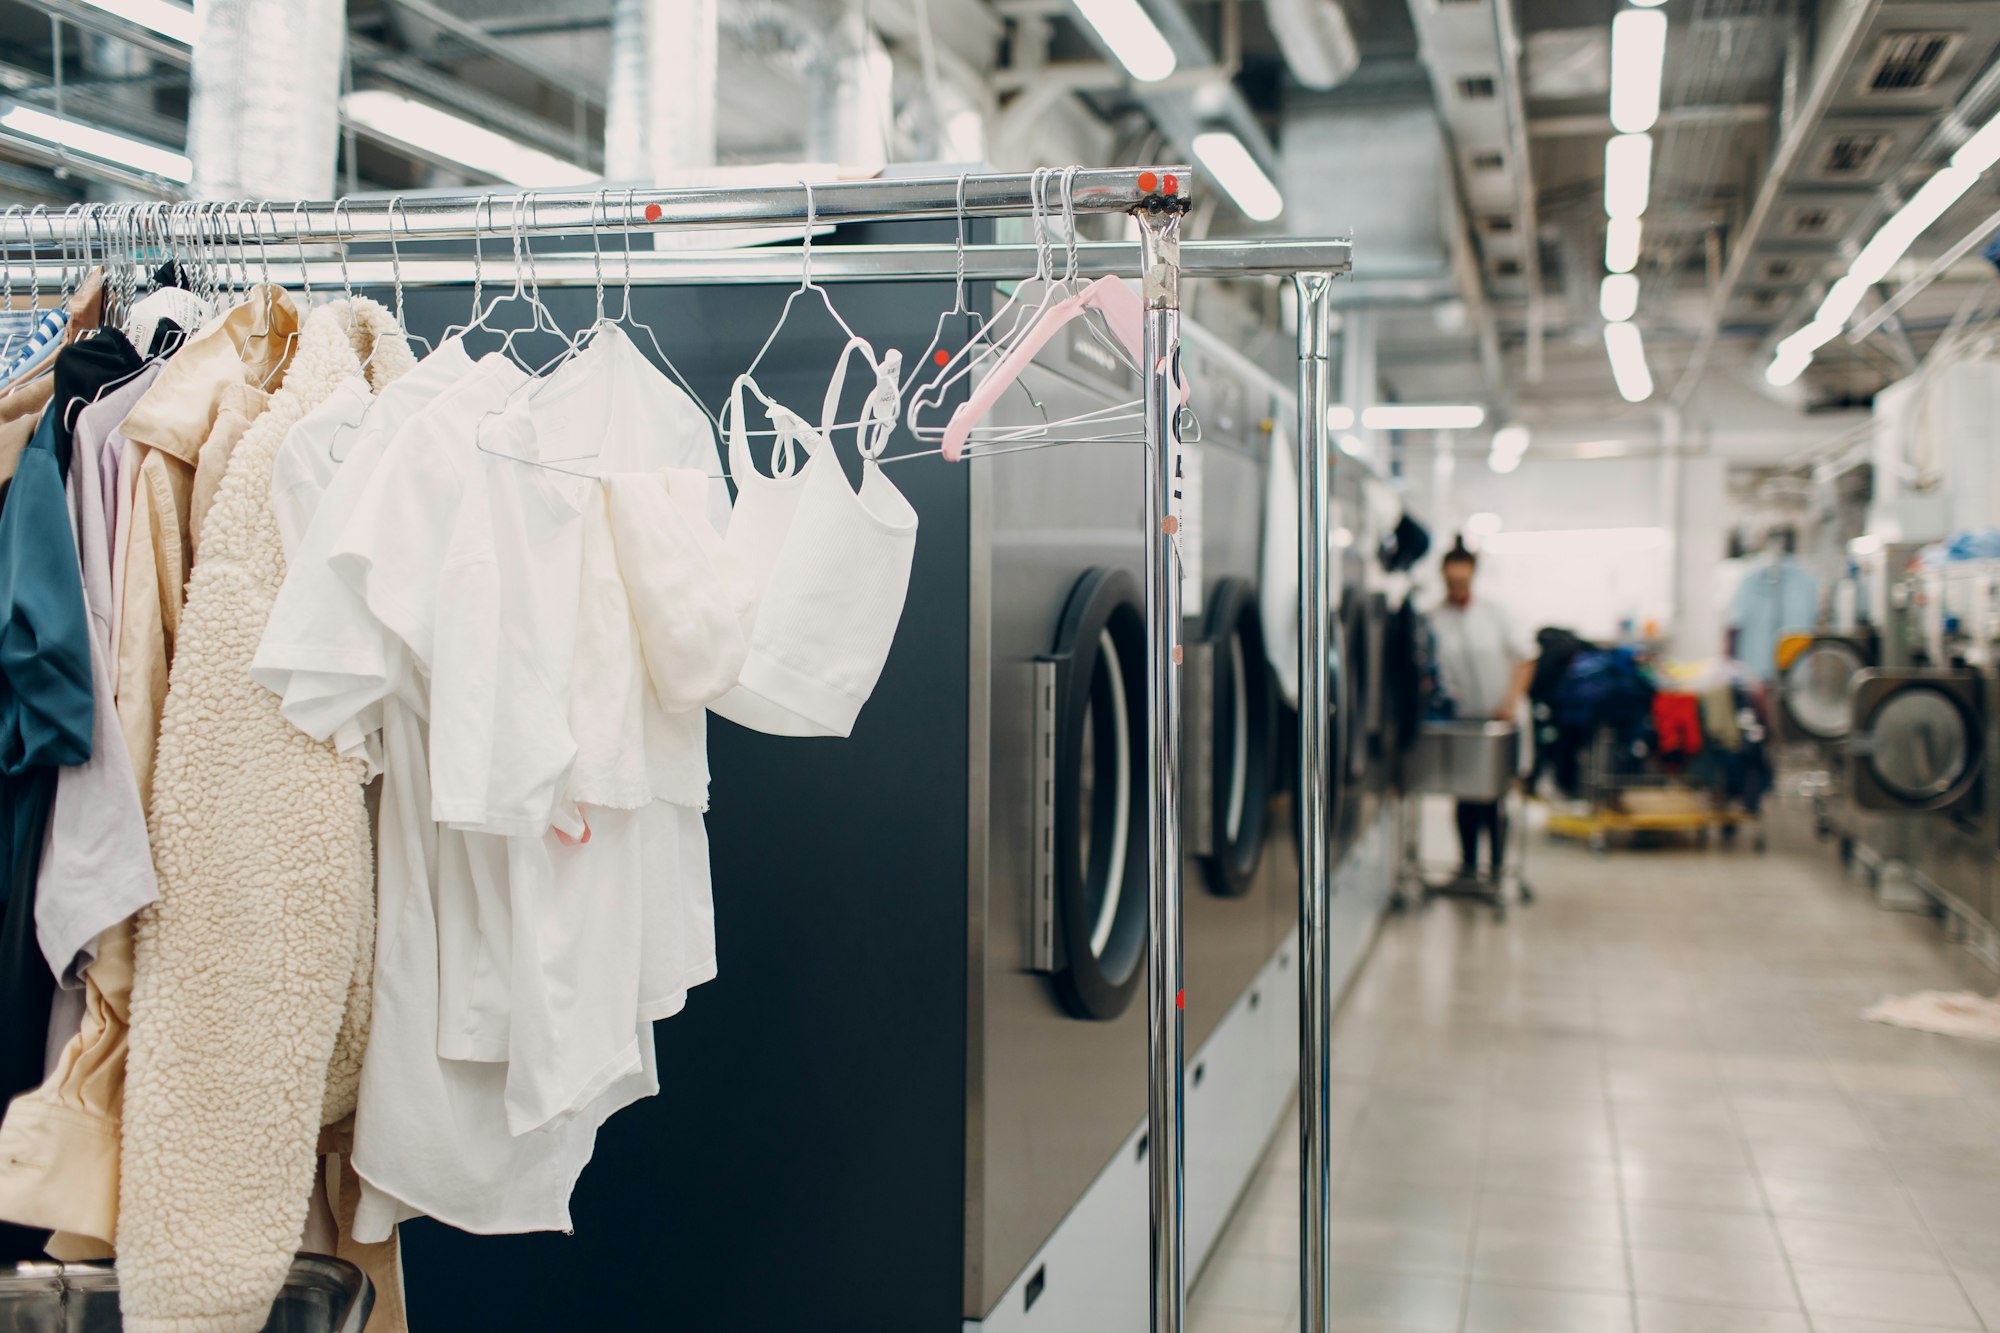 Dry cleaning clothes. Clean cloth chemical process. Laundry industrial dry-cleaning